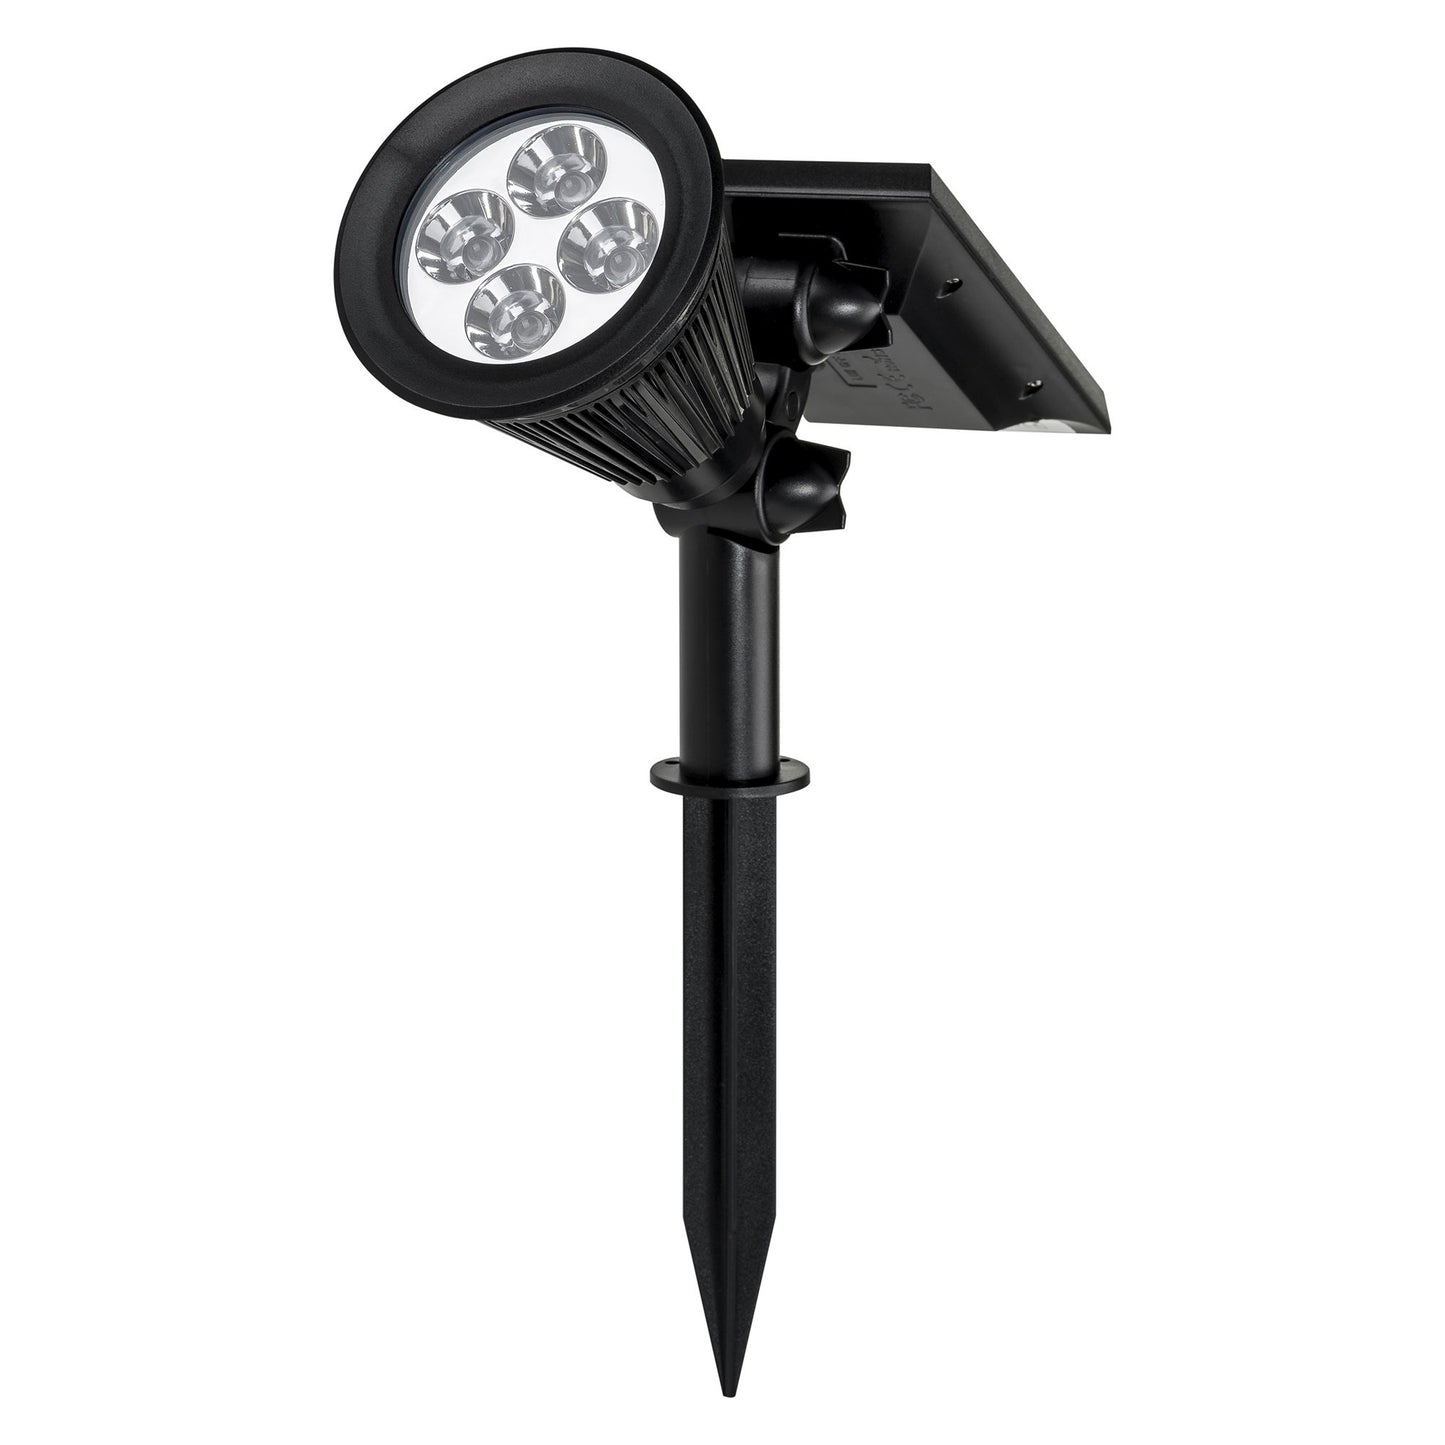 High-Output Garden Spot Light with Attached Solar Panel - Warm White